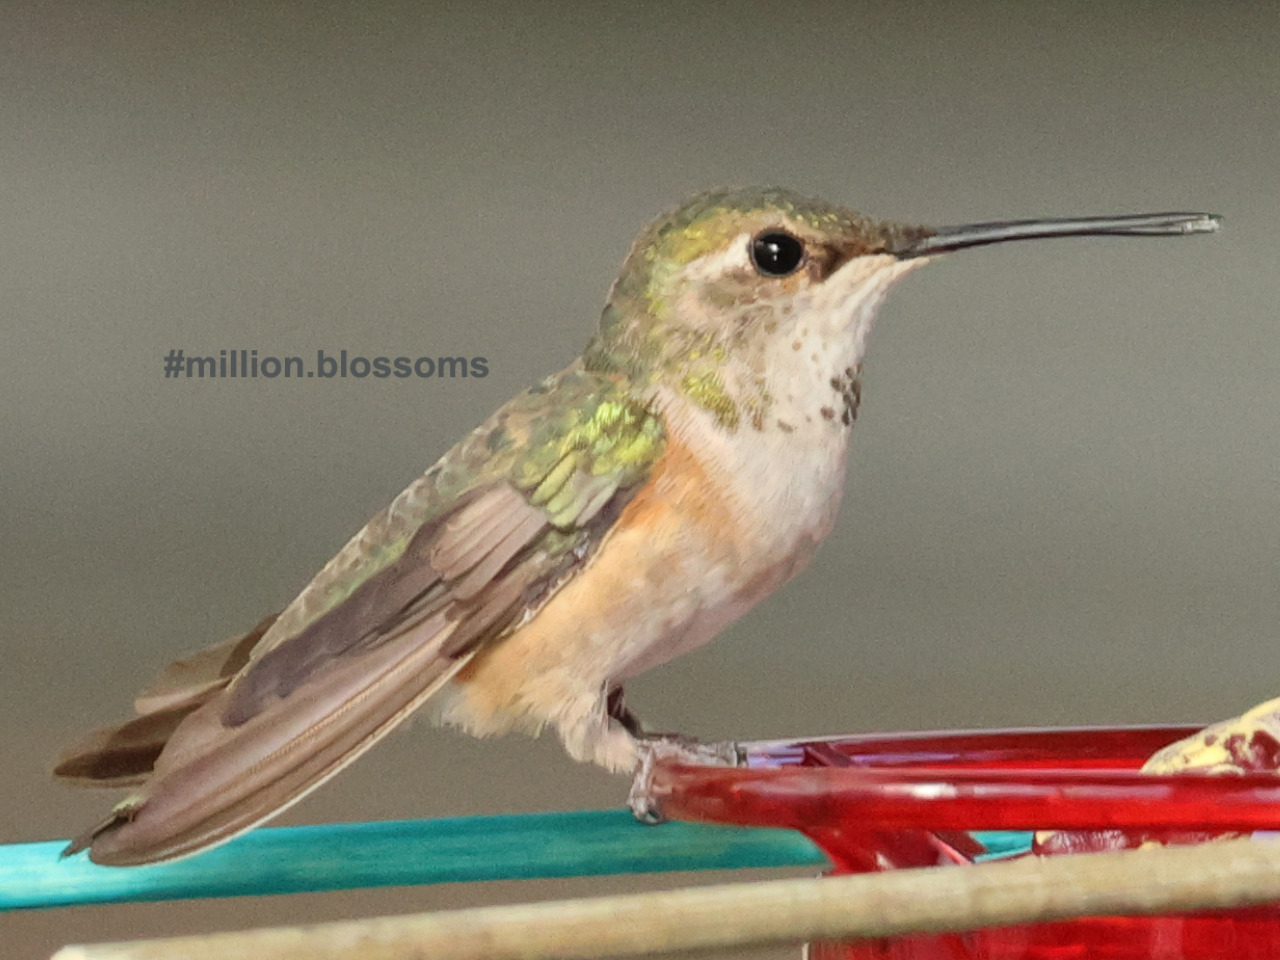 Columbus the Hummingbird with an insect in her beak